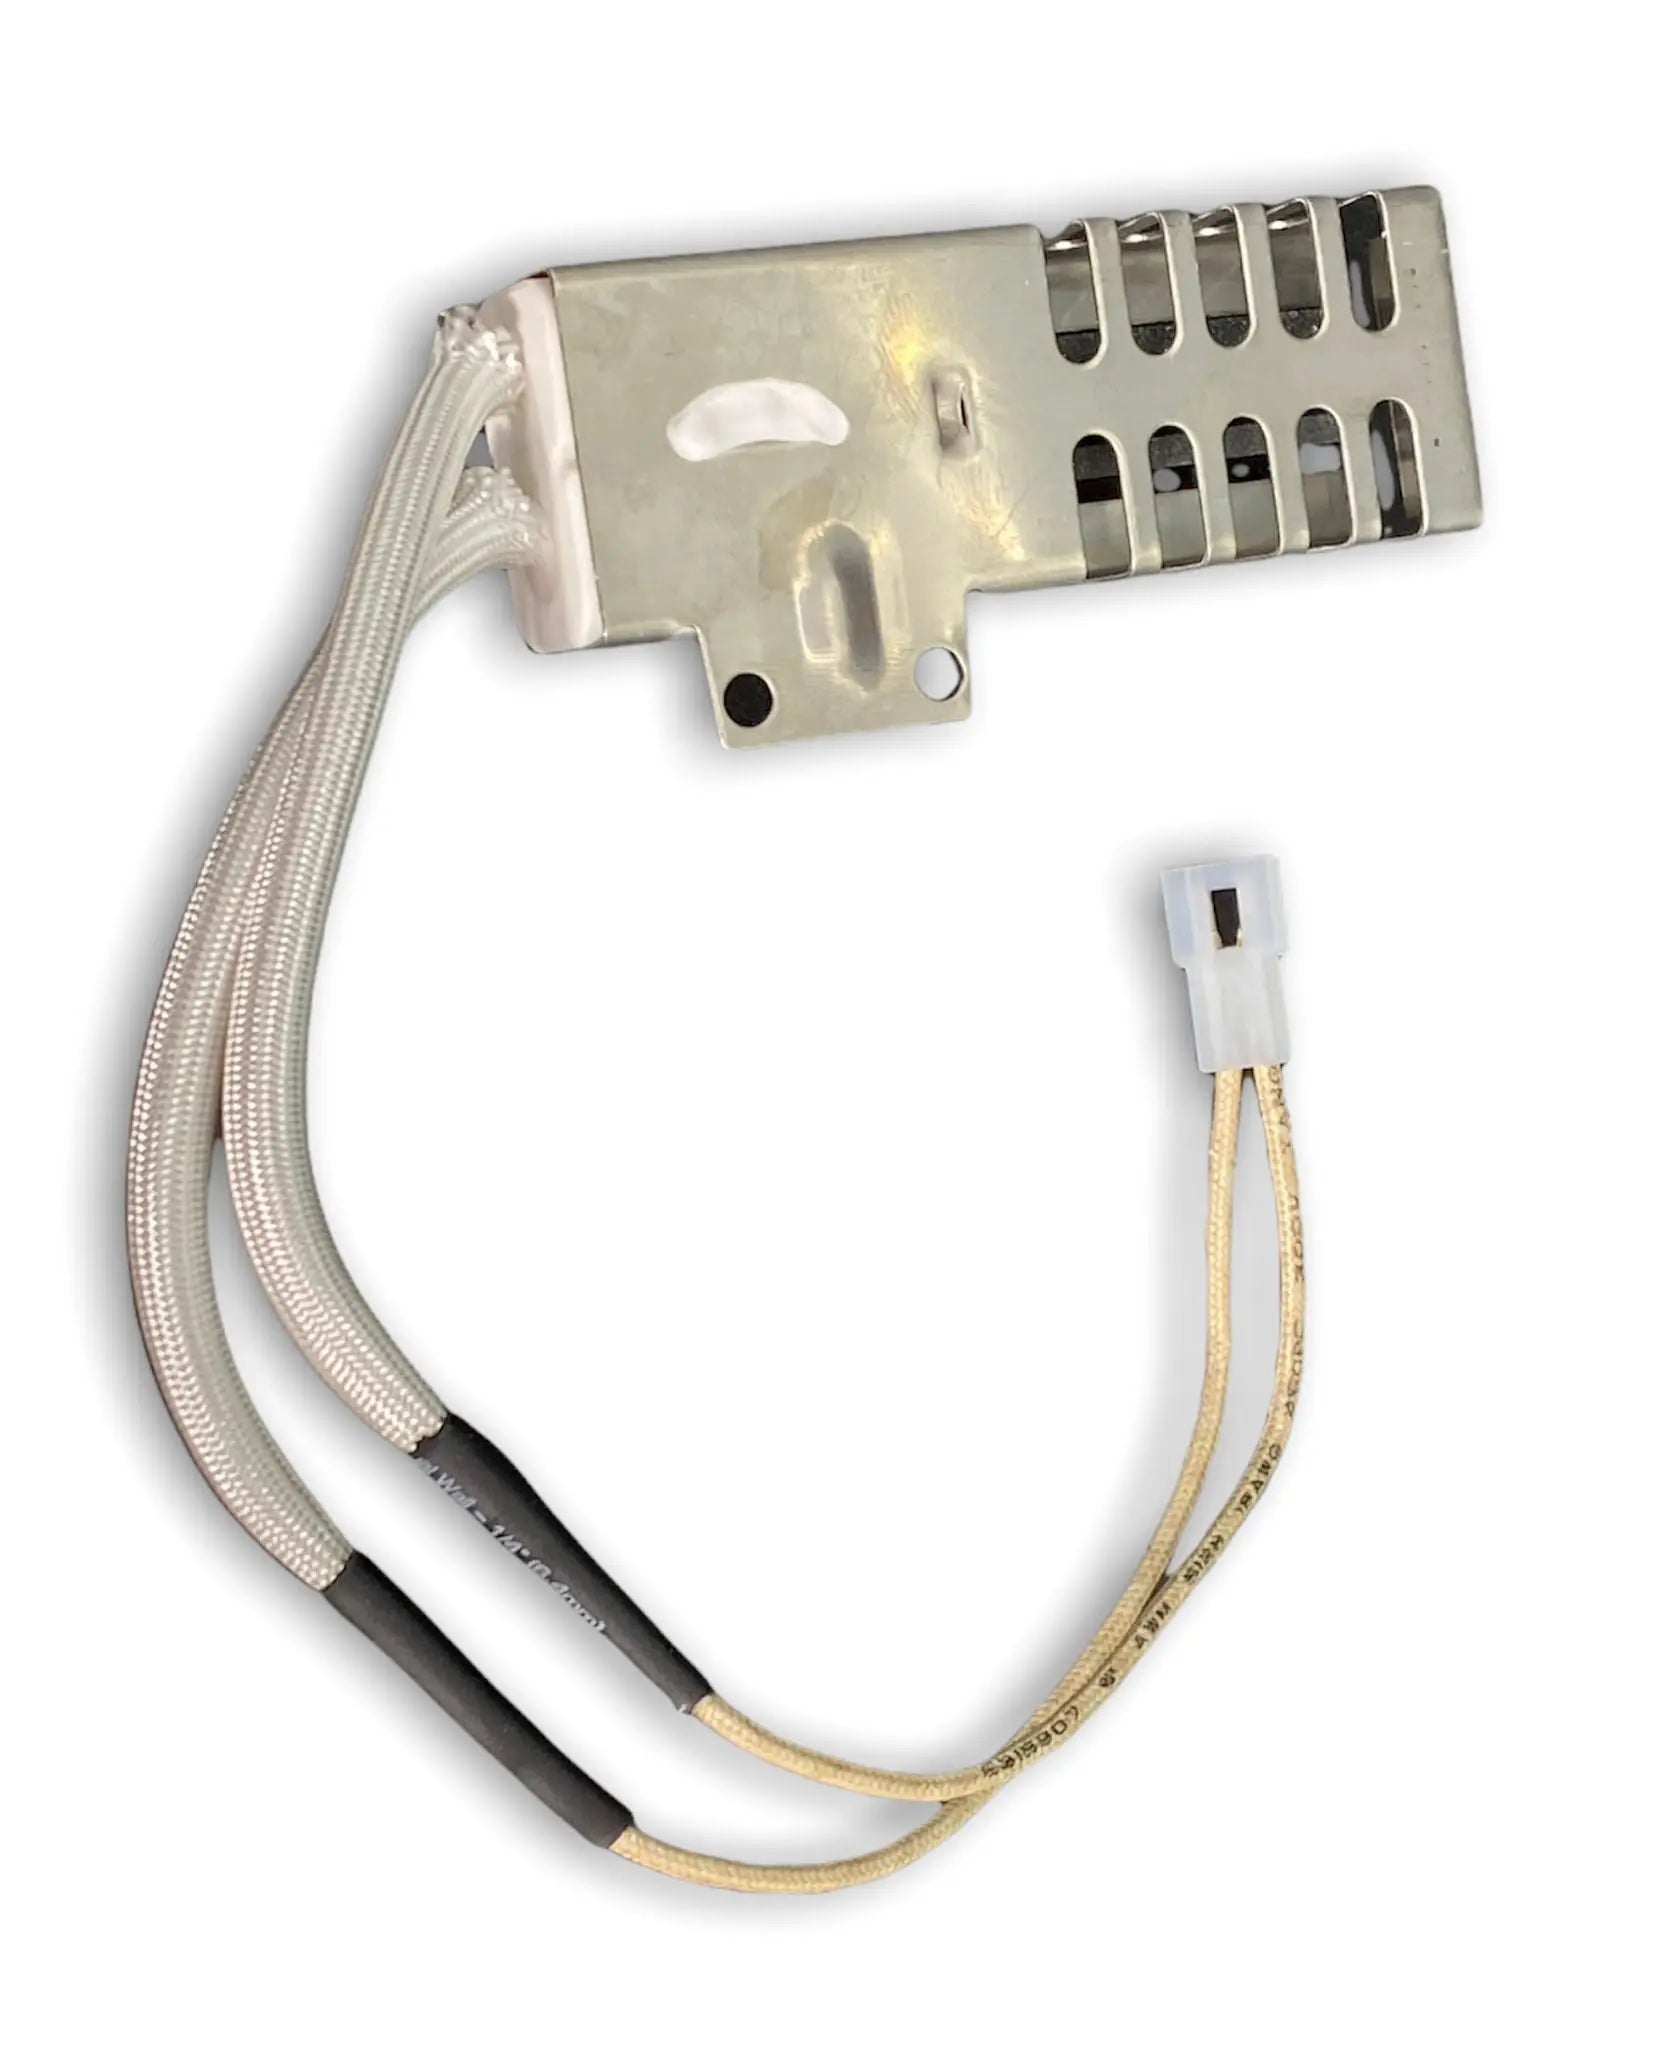 WHIRLPOOL Range Flat Gas Igniter, Hot Surface - W10918546 or WPW10140611 , REPLACES: 98005652 W10140611 PD00031392 4454963 AP6037202 PS11770066 EAP11770066 INVERTEC